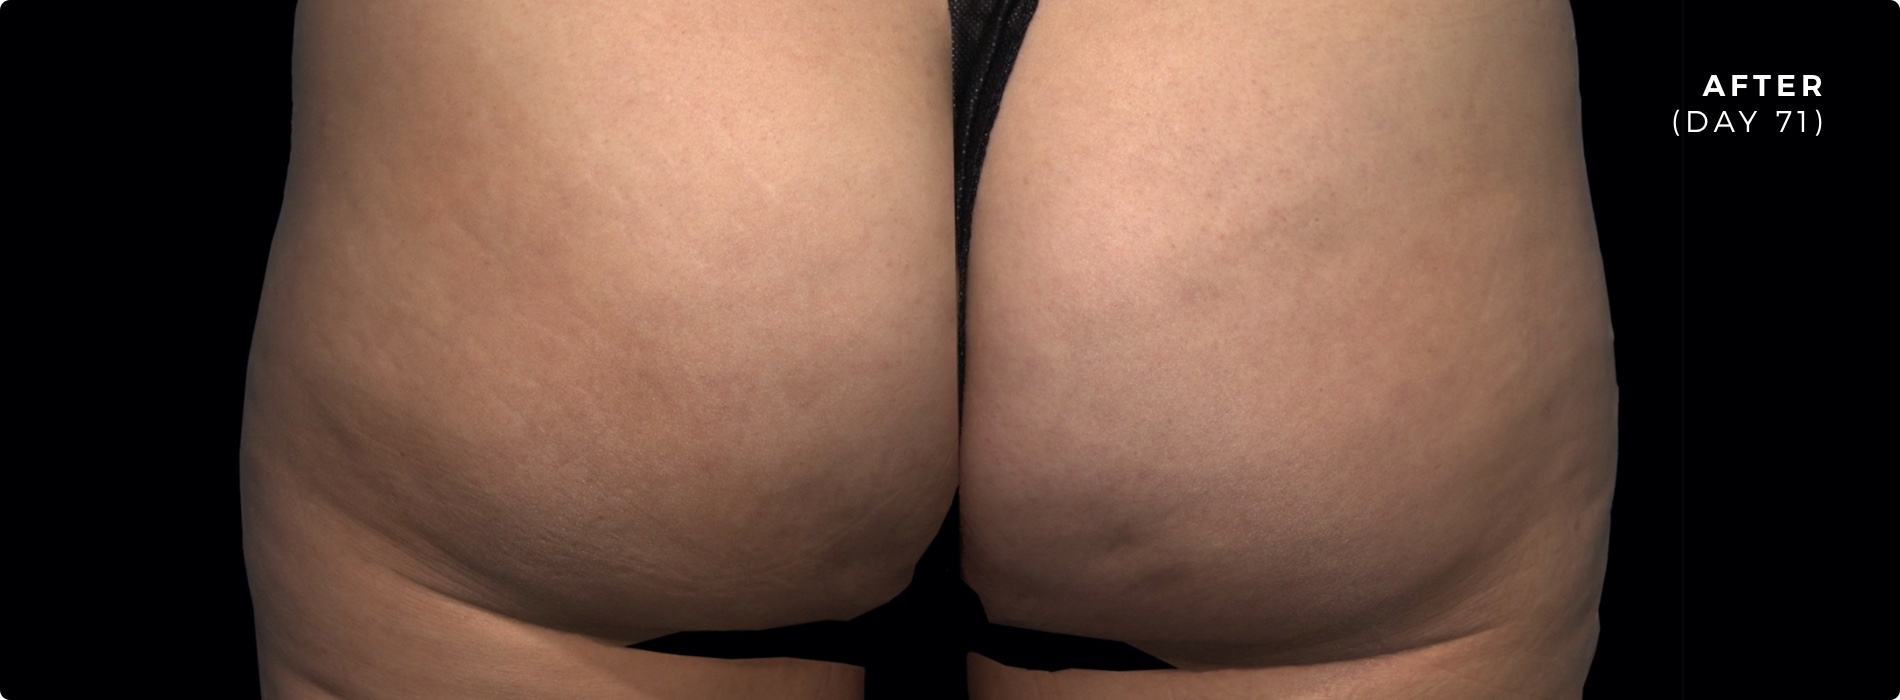  qwo cellulite treatment injections - boss md plastic surgery - bergen county nj